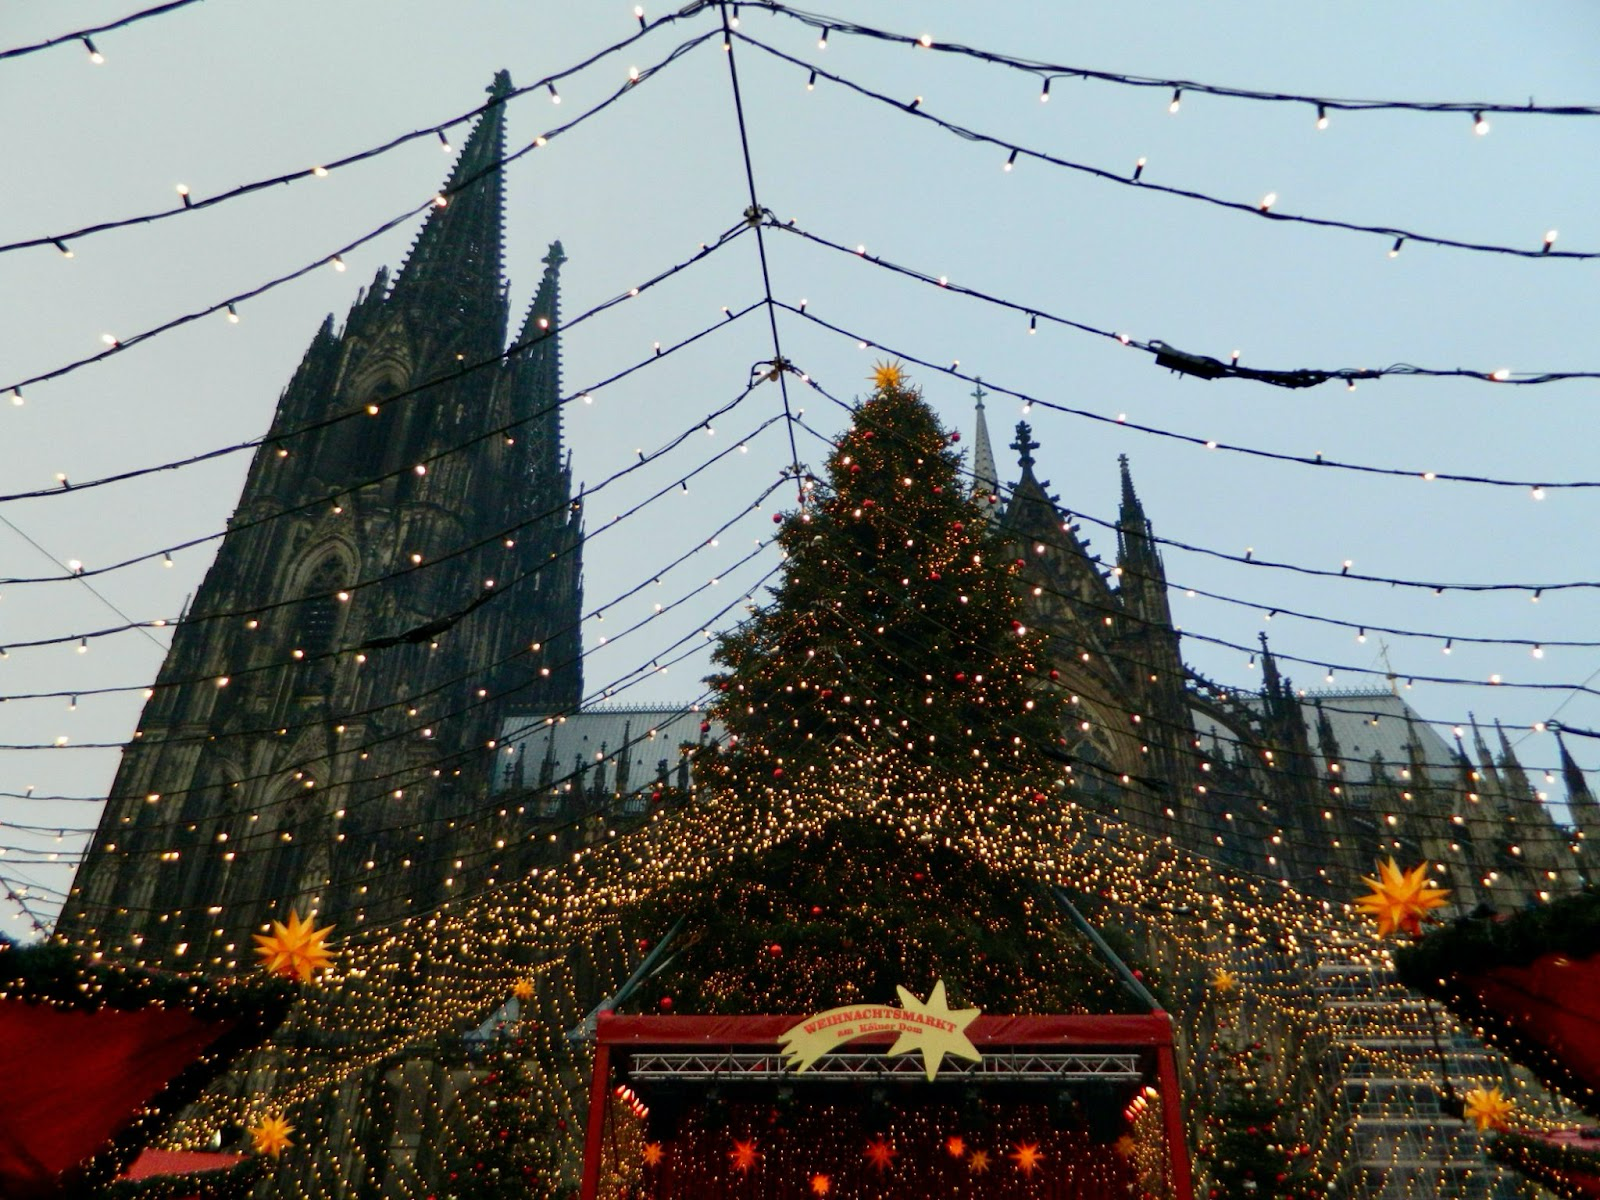 Germany is the Mecca of Christmas markets, visit the European destination that seemingly has it all. 
Pictured: the Christmas market in front of the Cologne Cathedral 